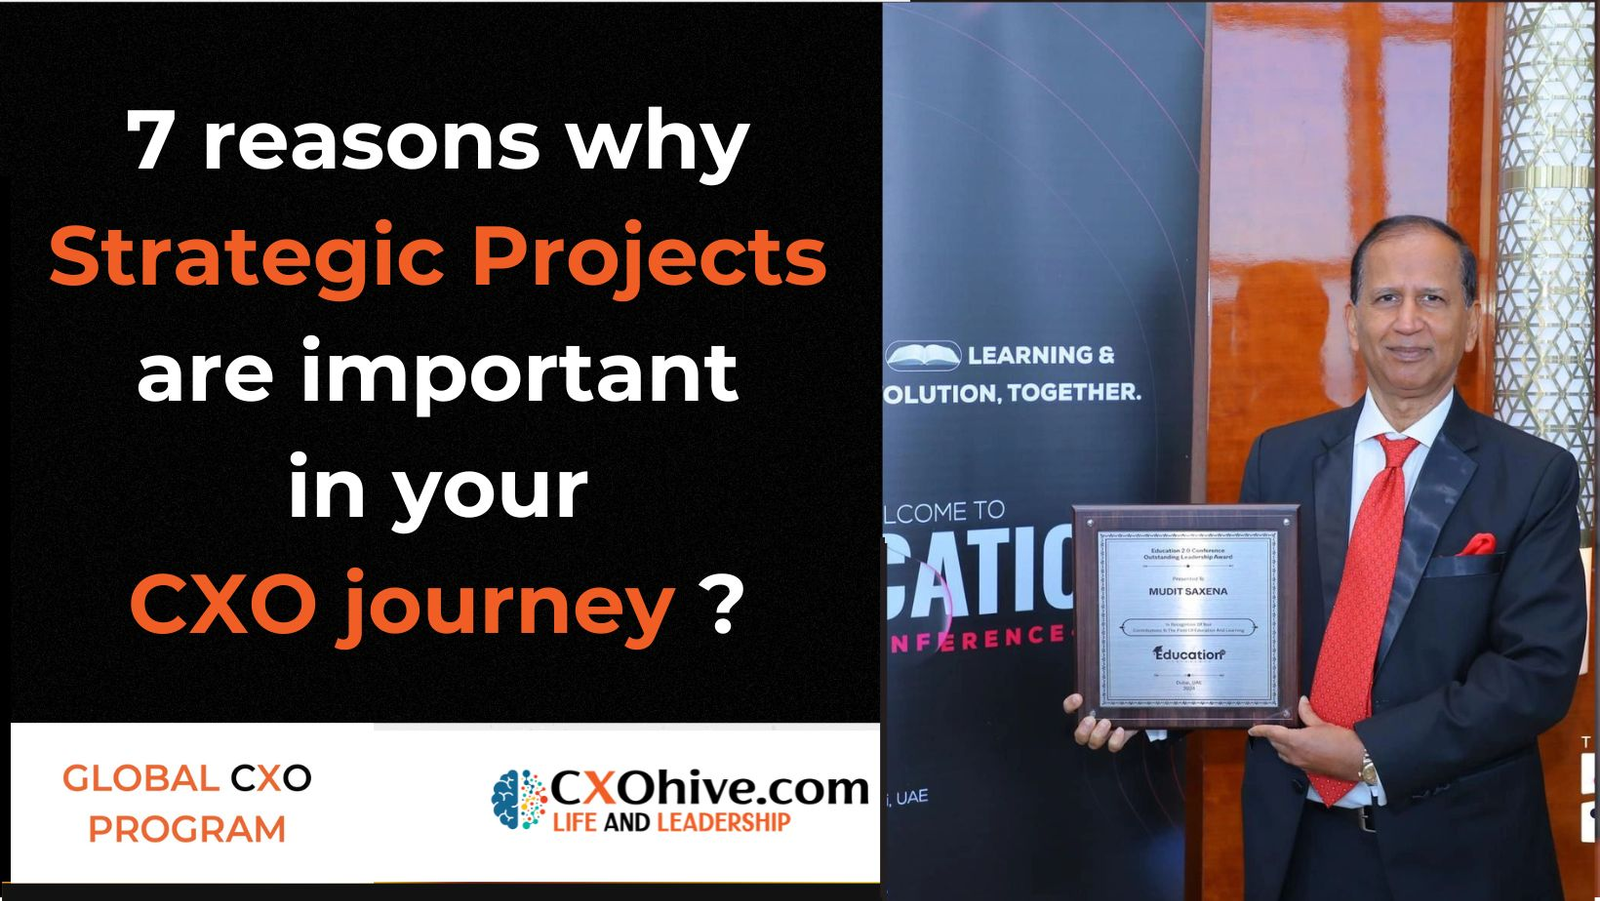 Why Strategic Projects are important in your CXO journey?